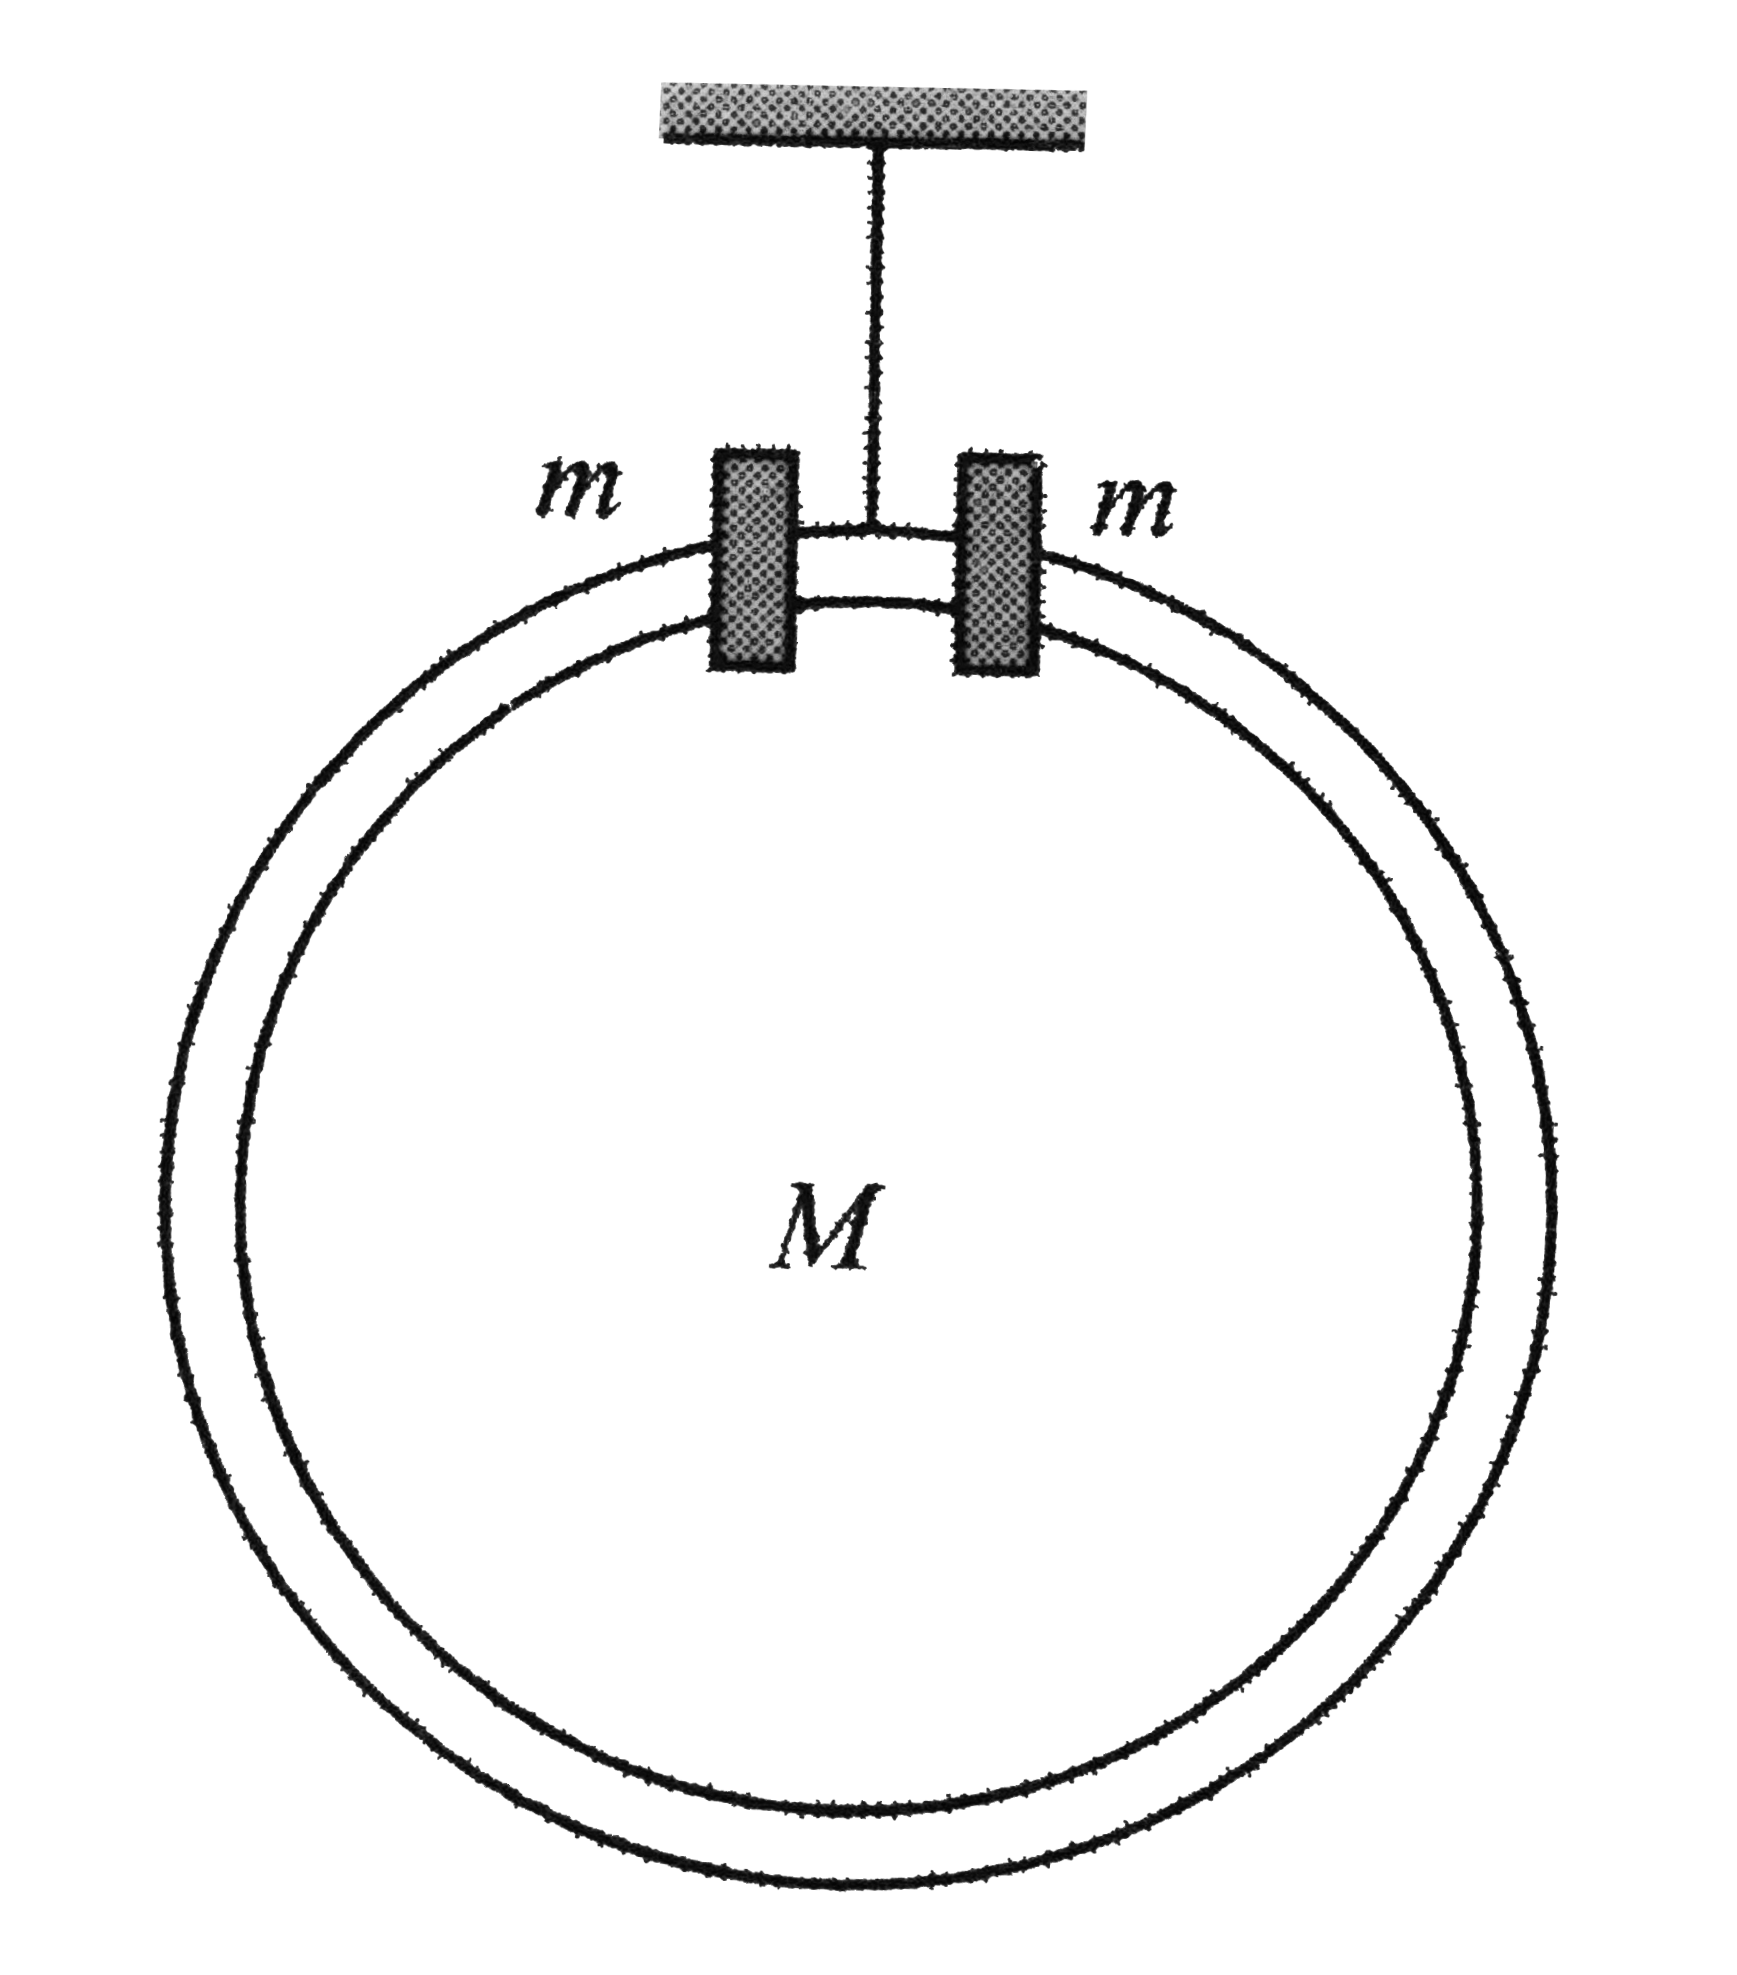 A loop of mass M with two identical rings of mass m at its top hangs from a ceiling by an inextensible string. If the rings gently pushed horizontally in opposite directions, find the angular distance covered by each ring when the tension in the string vanishes for once during their motion.